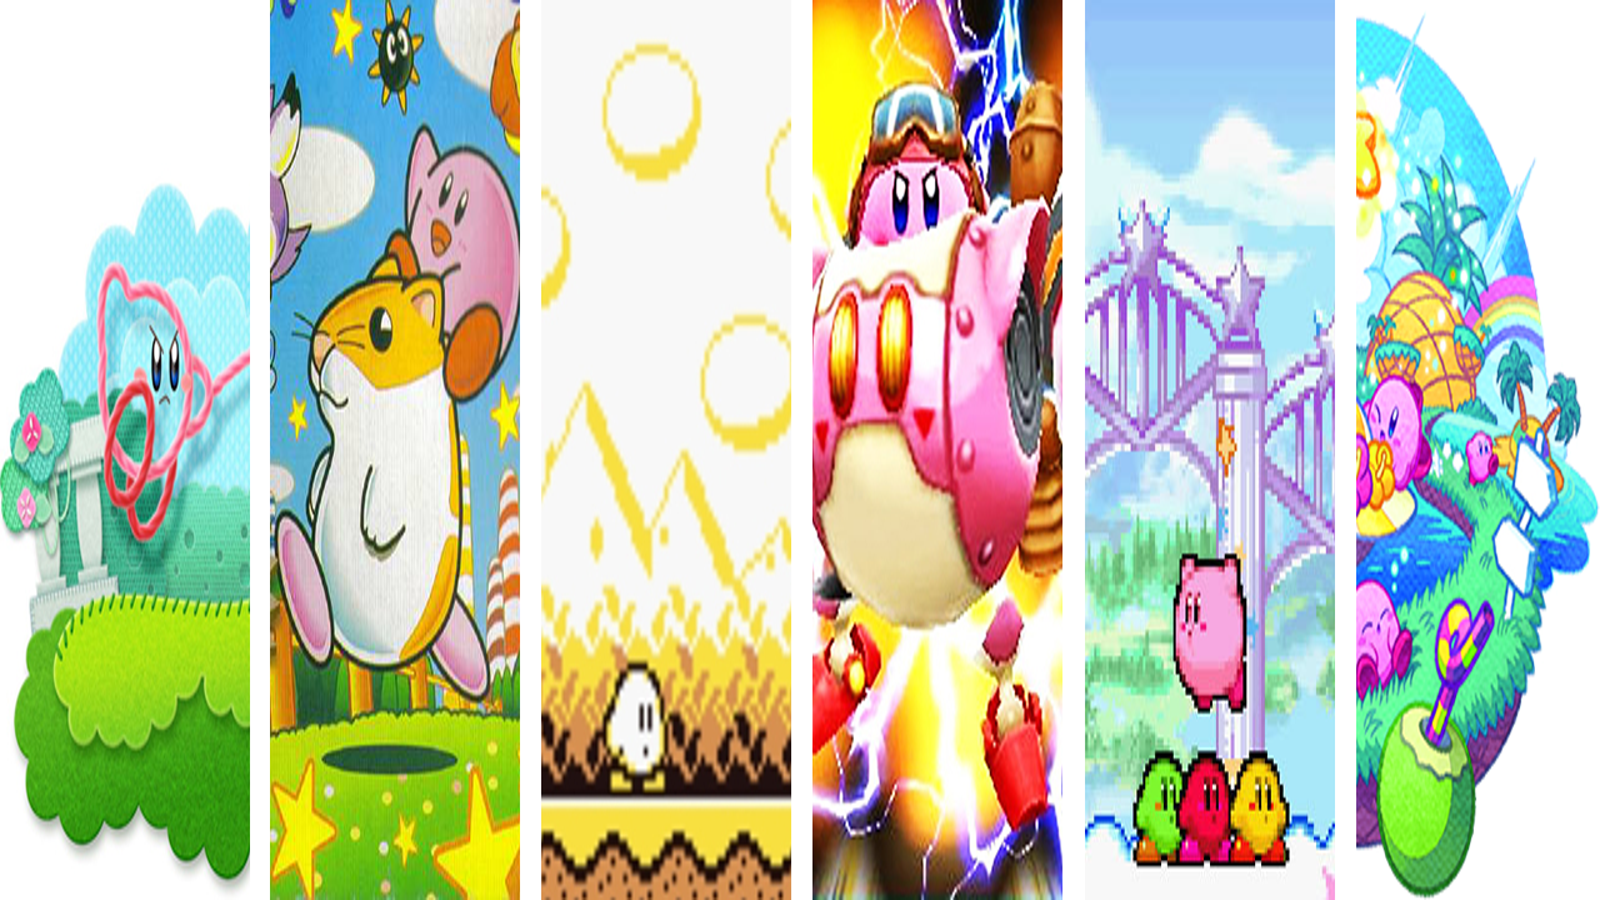 Kirby Super Star Ultra became 10 years old this year so I made a